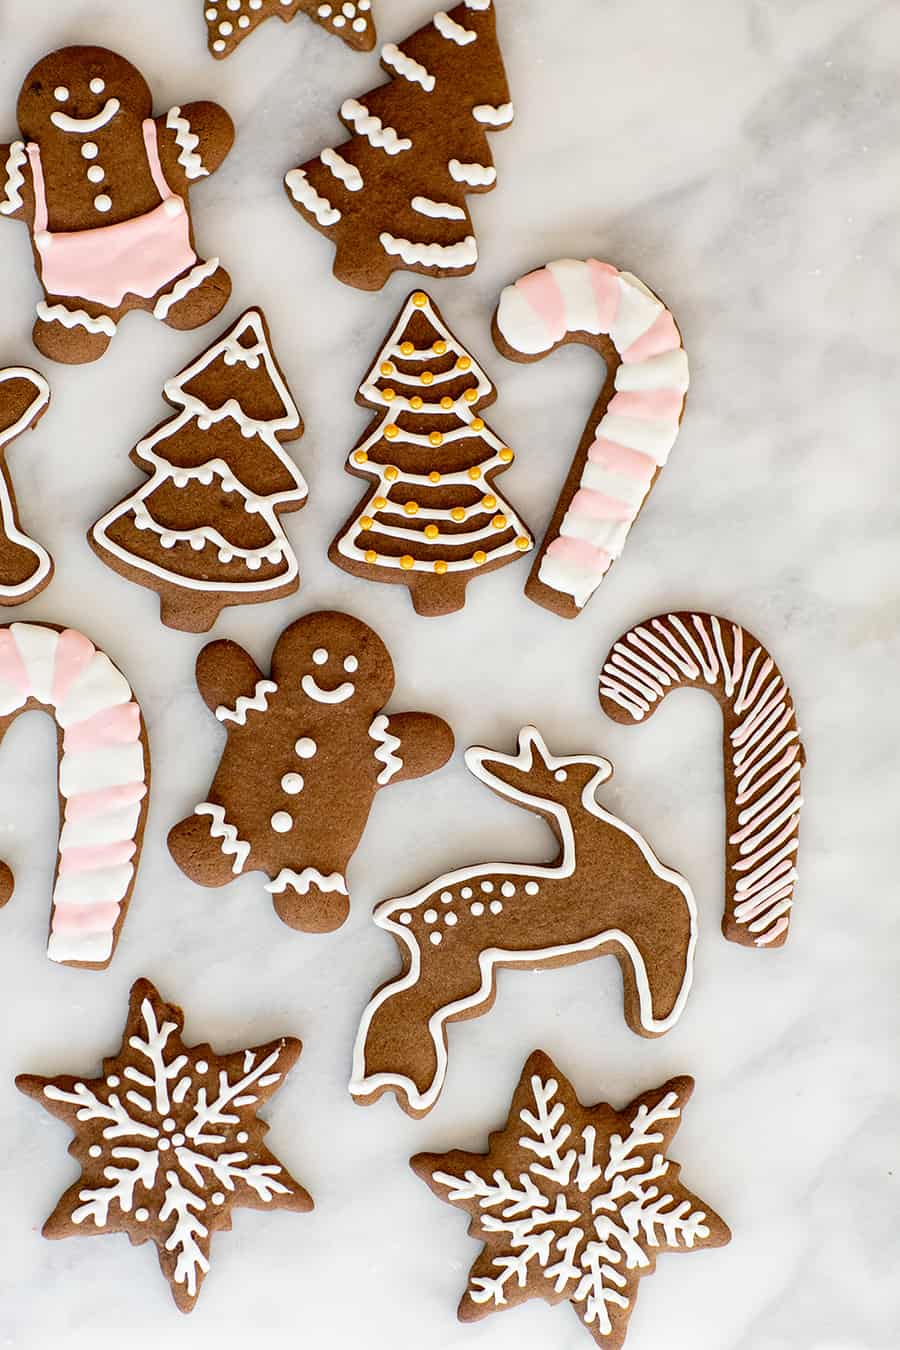 Decorated gingerbread cookies 